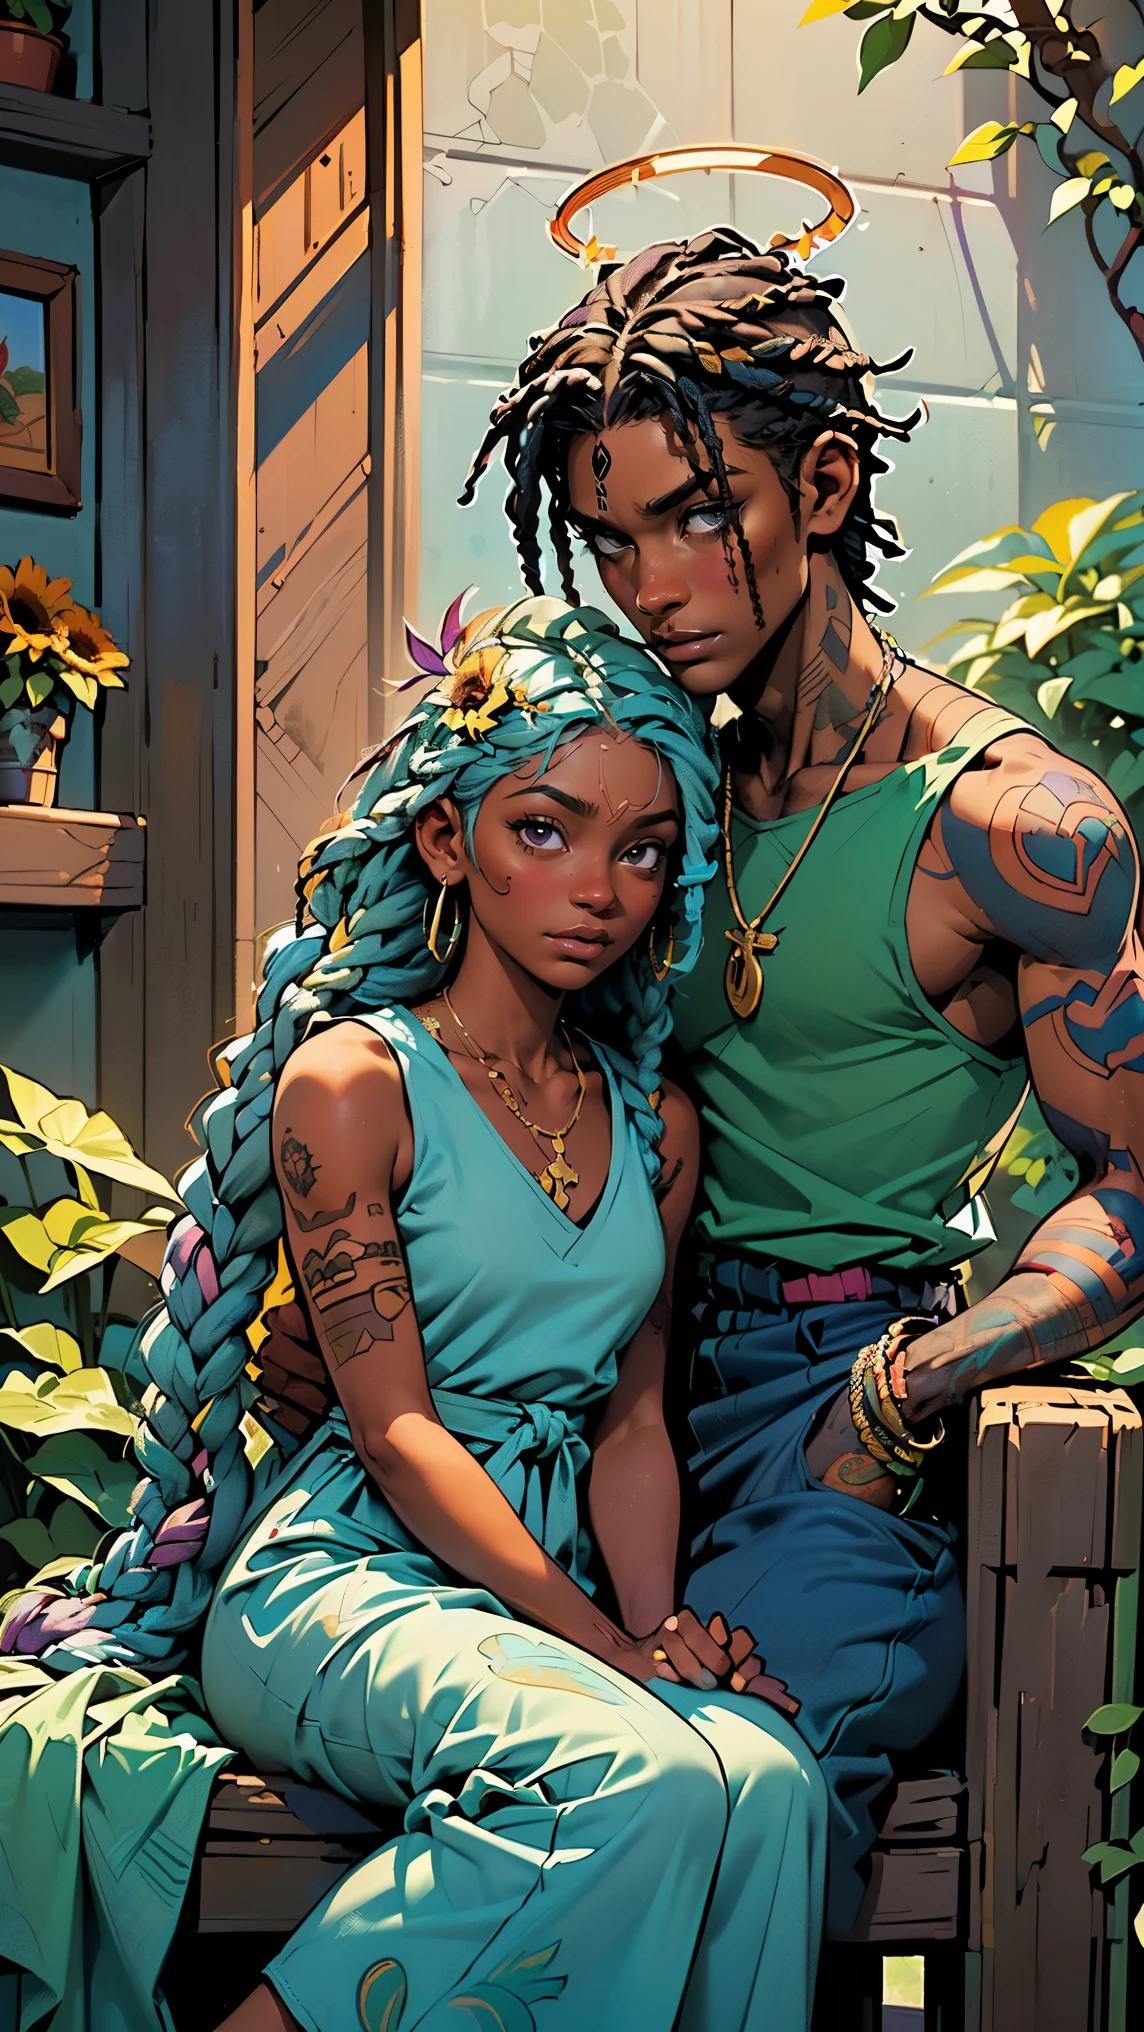 (Exterior: cannabis indica temple garden with sunflowers and roses in bloom with overgrown cannabis indica shrubs), the scene depicting two lovers sharing a peaceful morning meal together,
((Figure 1: 1girl dark-skinned Haitian woman, plump, messy violet hair, multicolored hair between eyes, dreadlocks, glowing halo, scar on cheek, cannabis leaf hair ornament, wearing flowing colorful sundress, sitting comfortably while rolling herbal joint peacefully)) next to ((Figure 2: 1boy, tan Caribbean man, athletic build, flowing braided blue hair, two-tone color hair, prayer bead necklace, wearing tight dark tank top, wearing colorful detailed hakama with sigil designs, tattooed arms and body, sitting next to girl cutting into pancake and eggs breakfast))